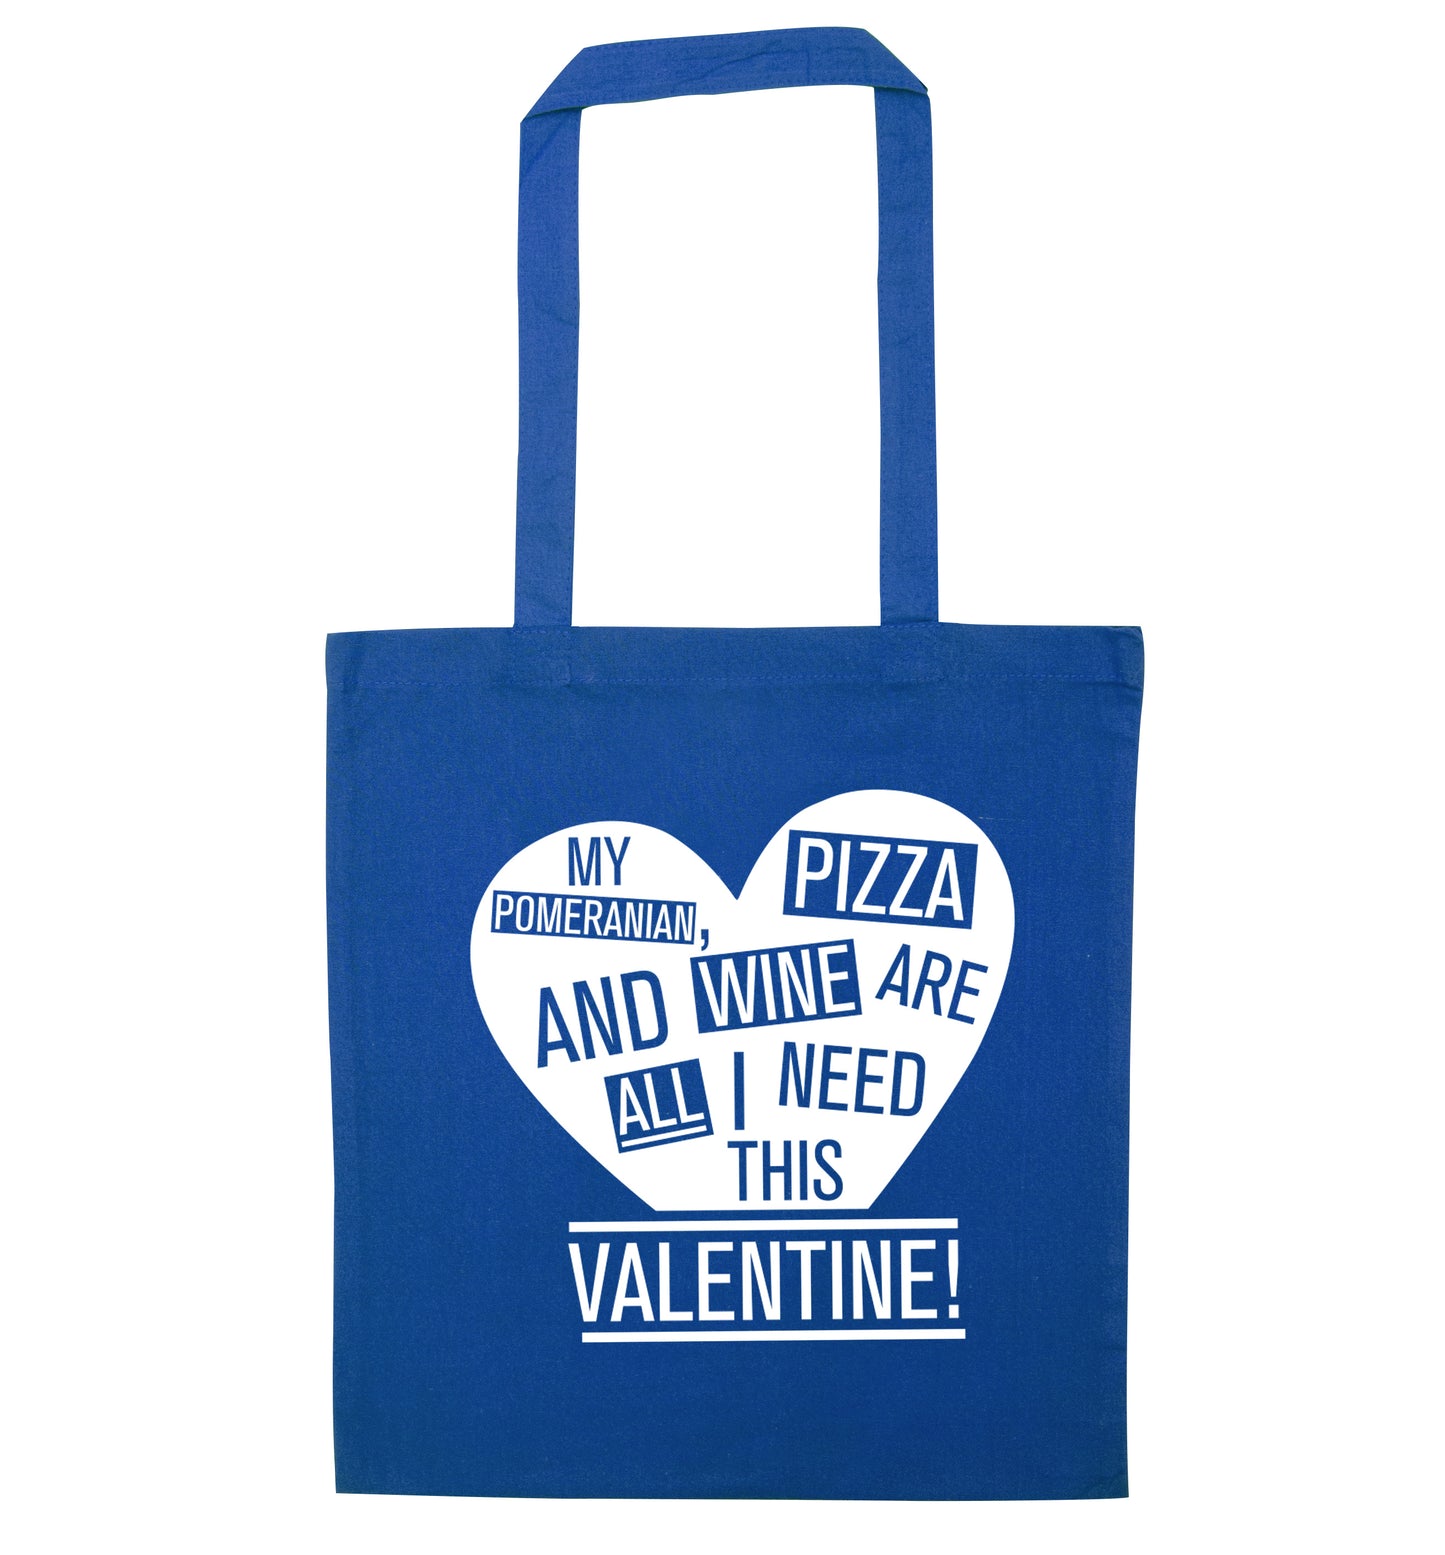 My pomeranian, chocolate and wine are all I need this valentine! blue tote bag